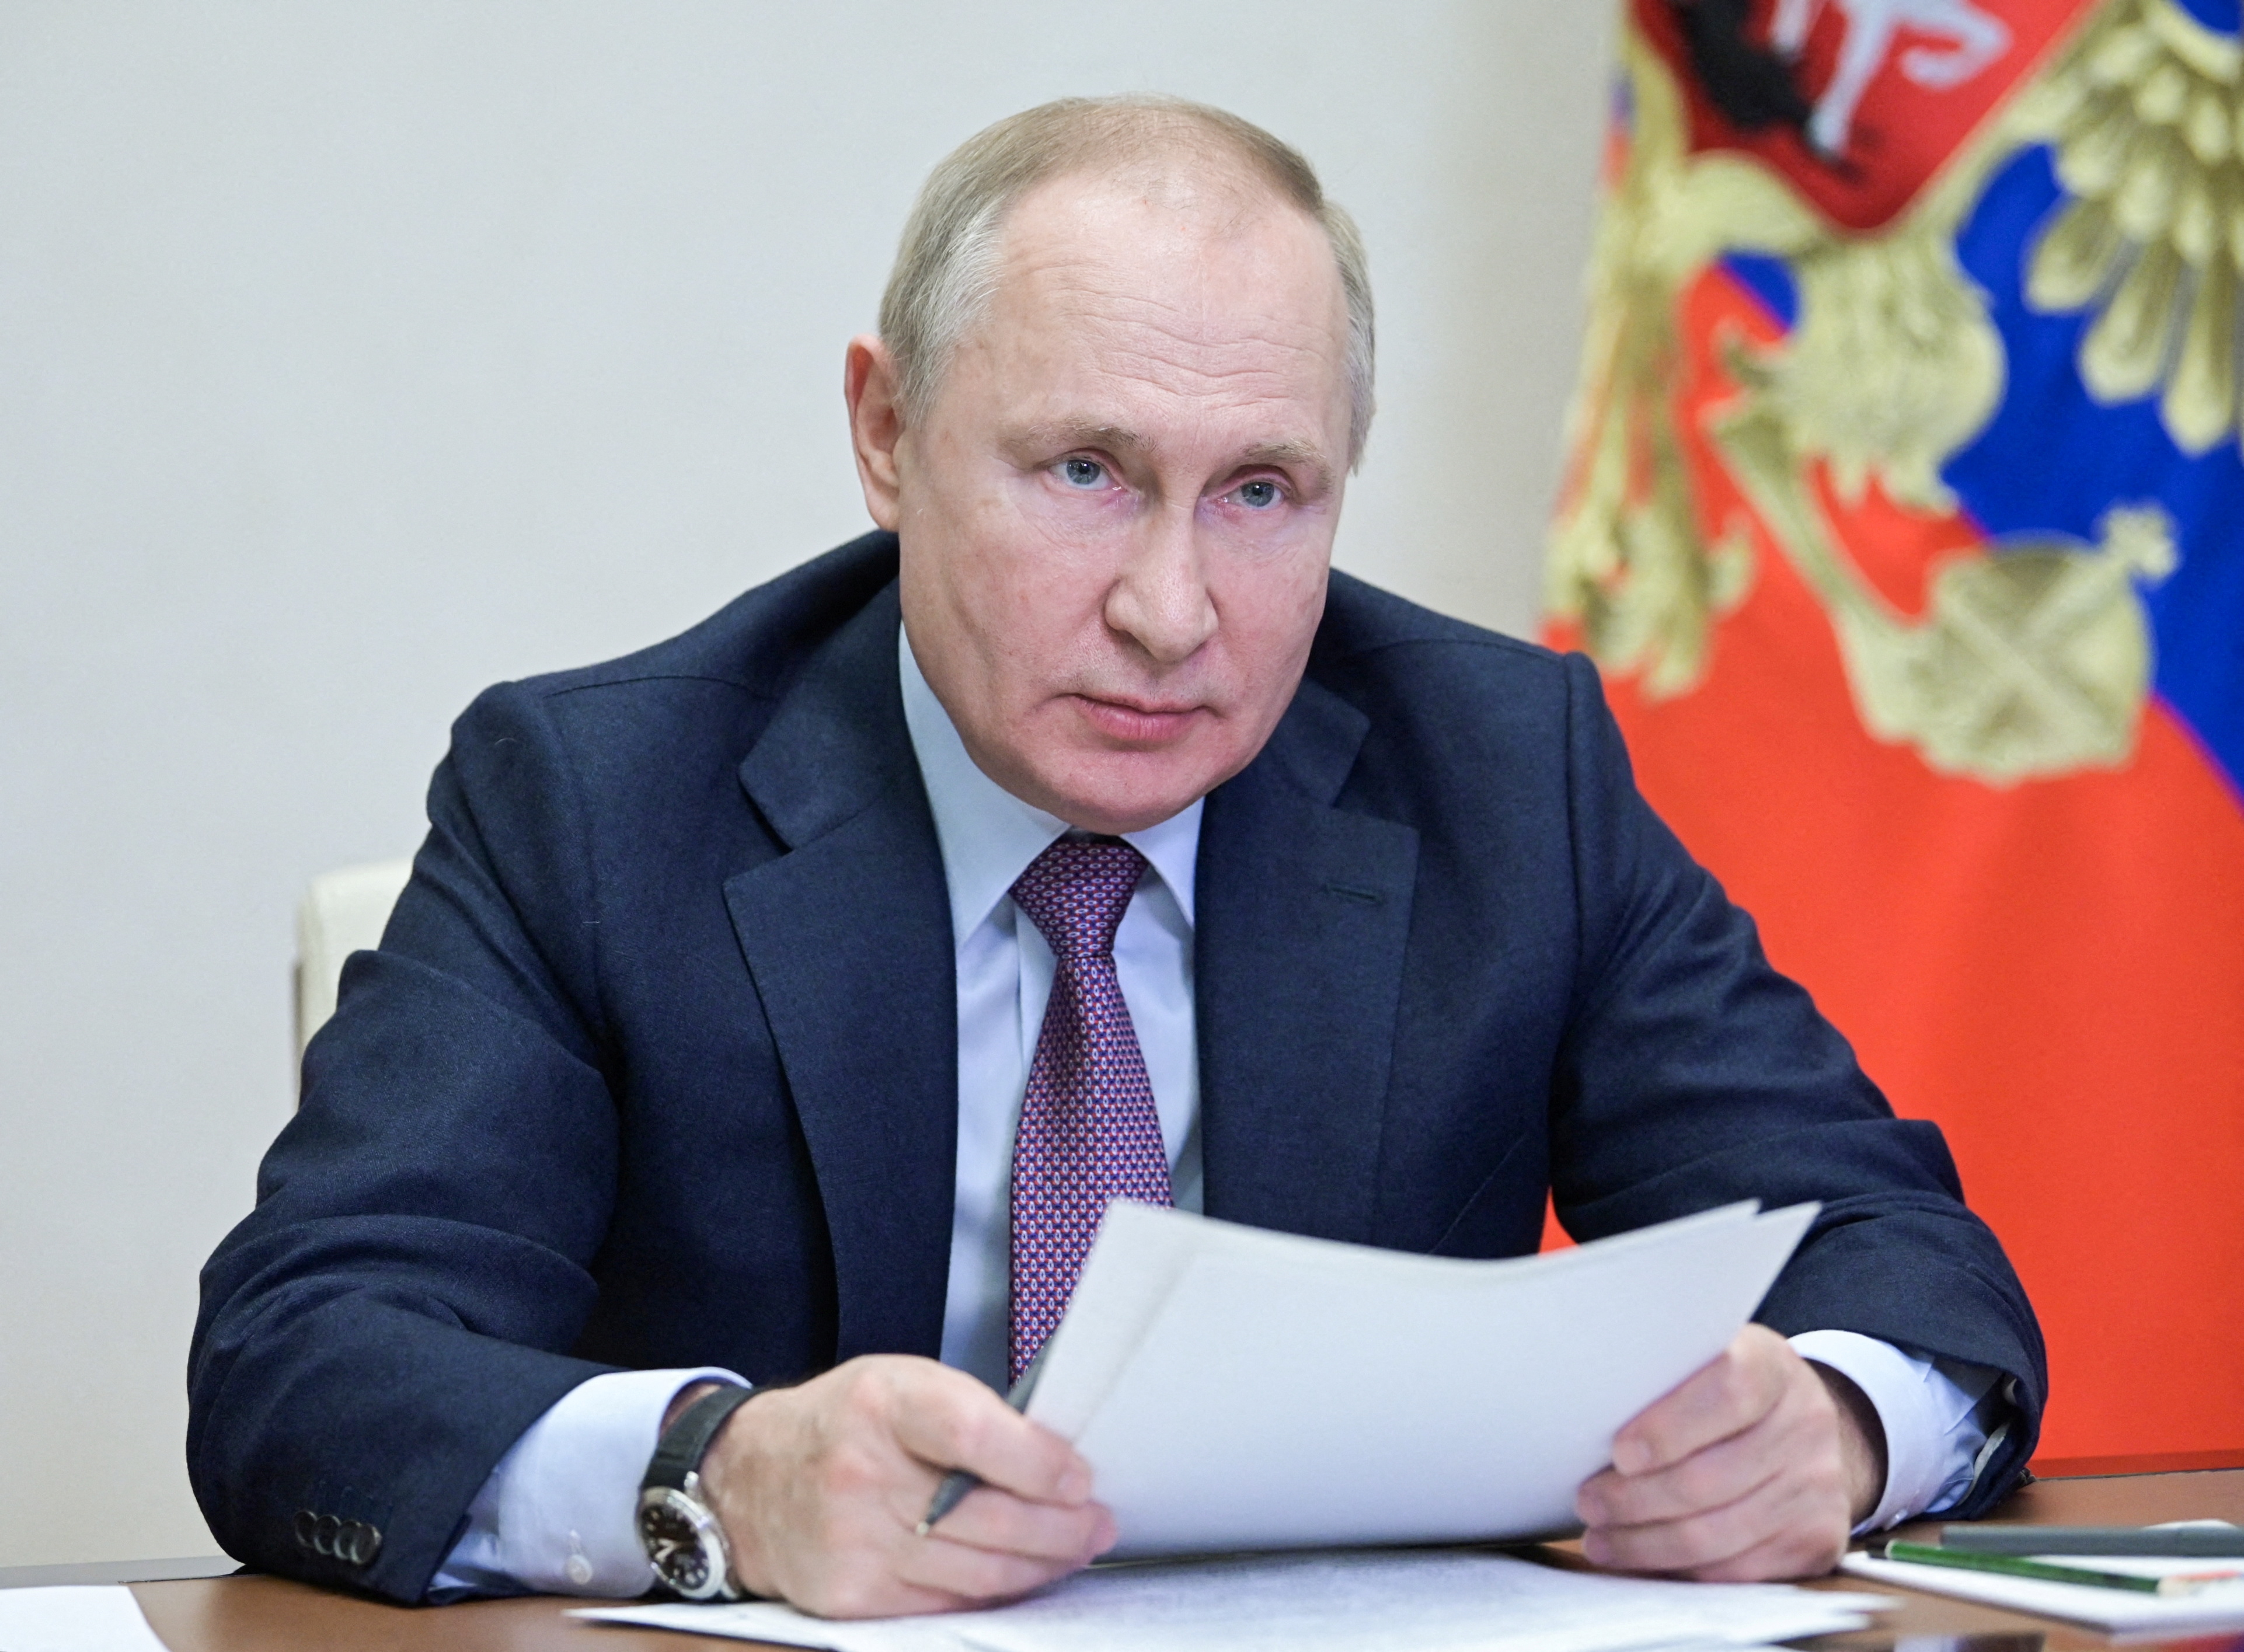 Russian President Putin chairs a meeting of the State Council of the Russian Federation and the Presidential Council for Science and Education, via a video link outside Moscow